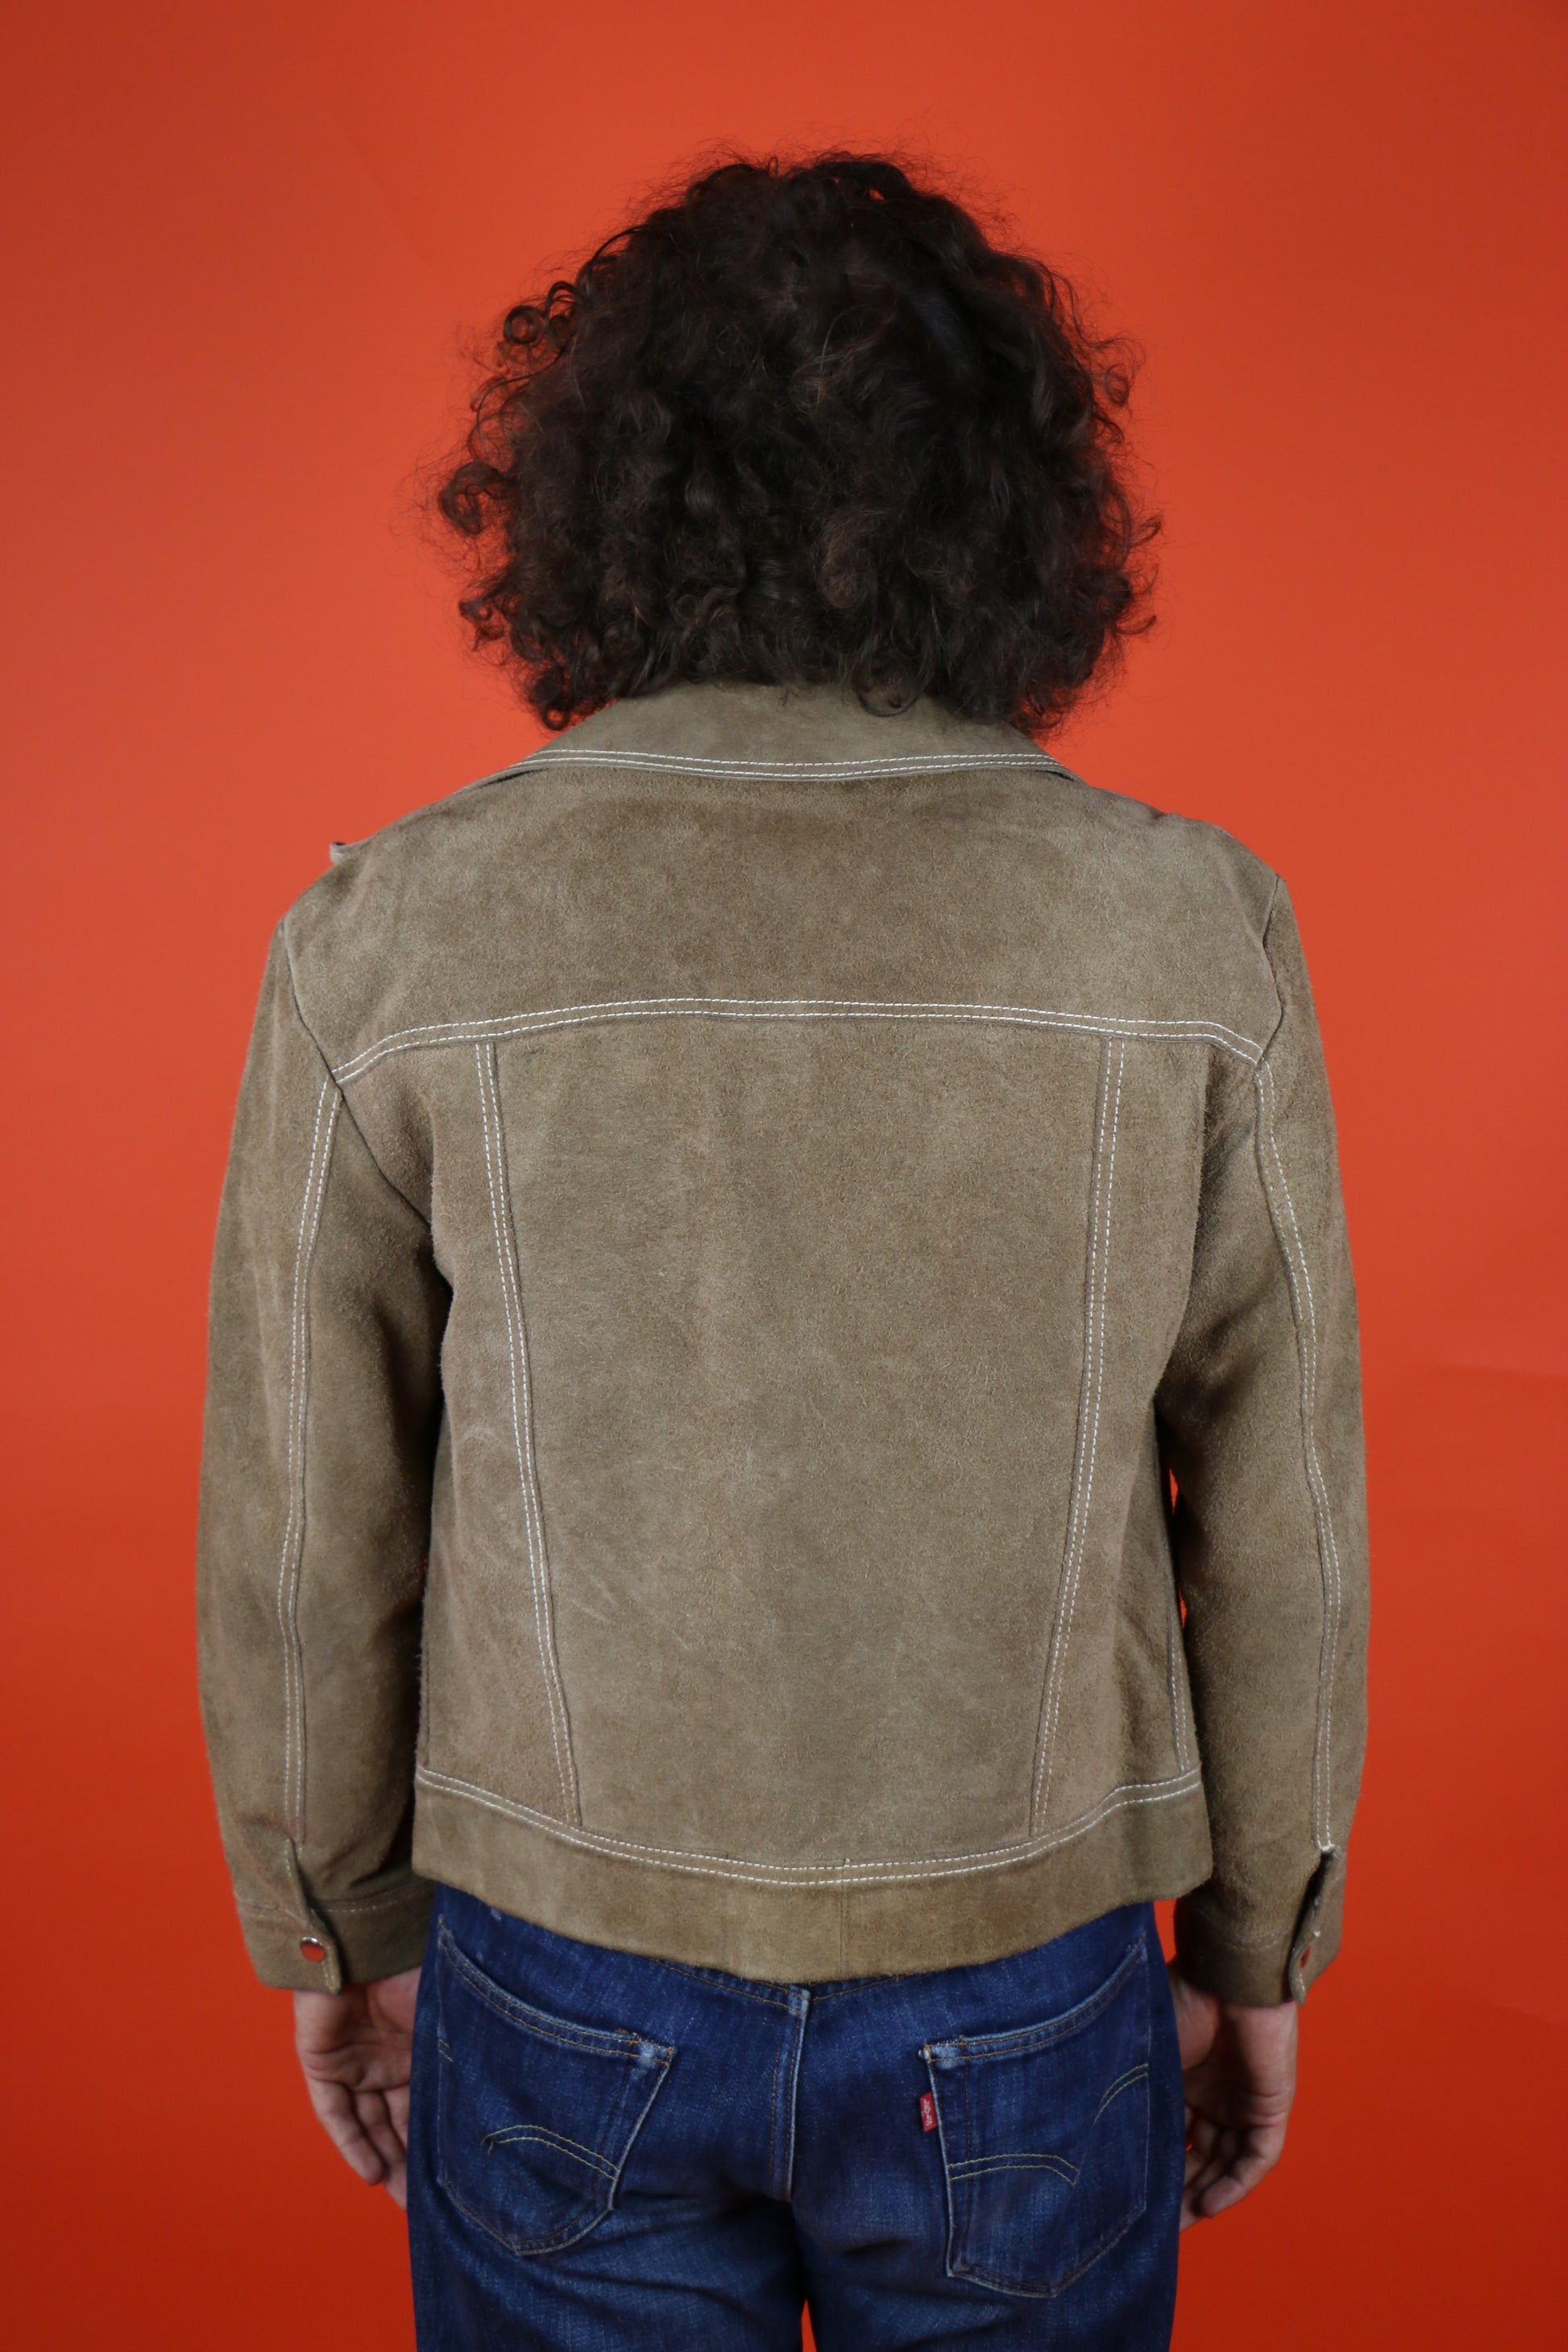 Mexican Leather Jacket 70s - vintage clothing clochard92.com